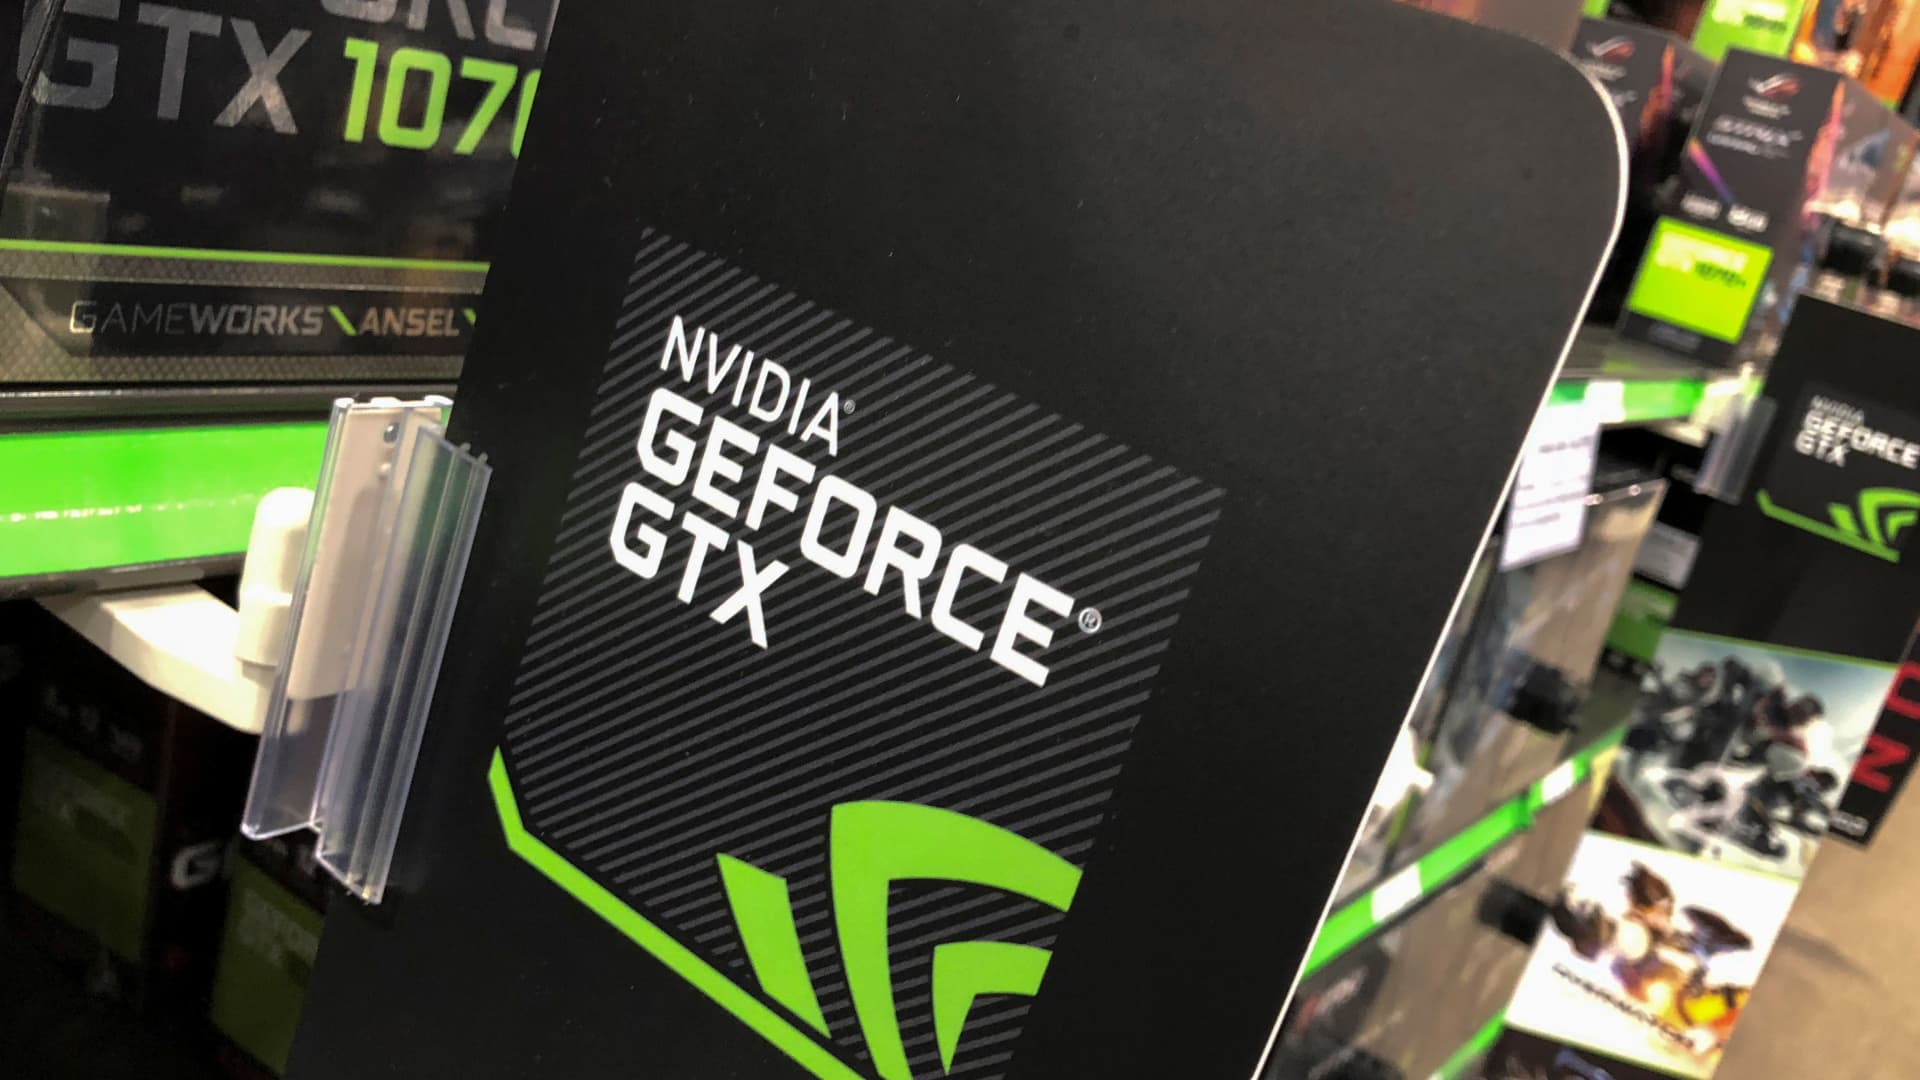 Here's the trade on Nvidia ahead of earnings, according to analysts